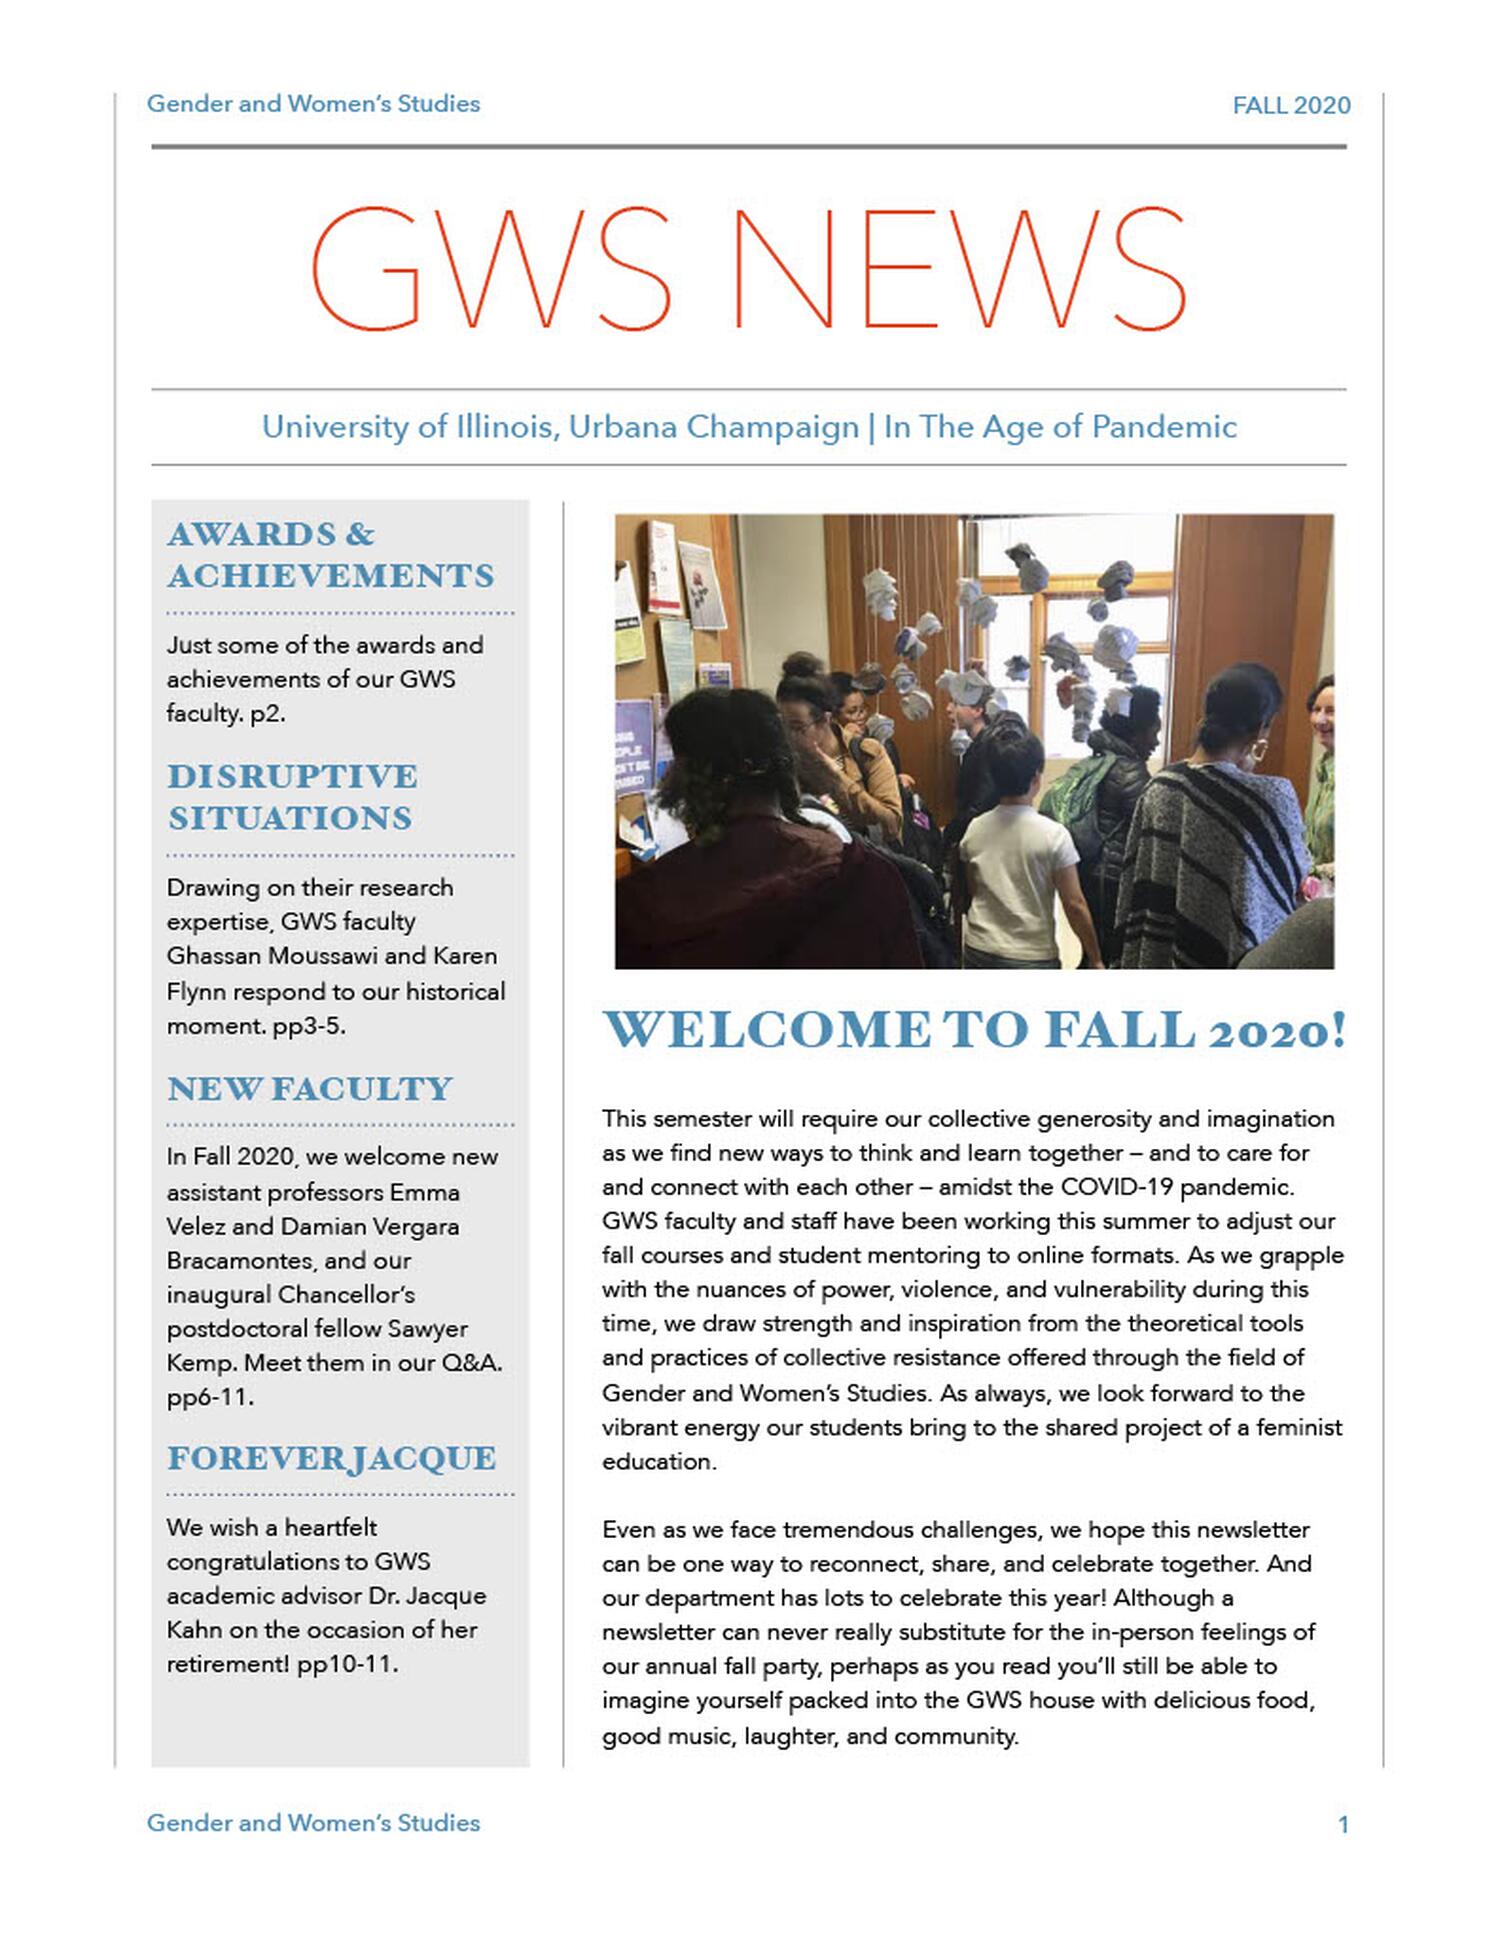 Image of the 1st page of the GWS Newsletter from Fall 2020